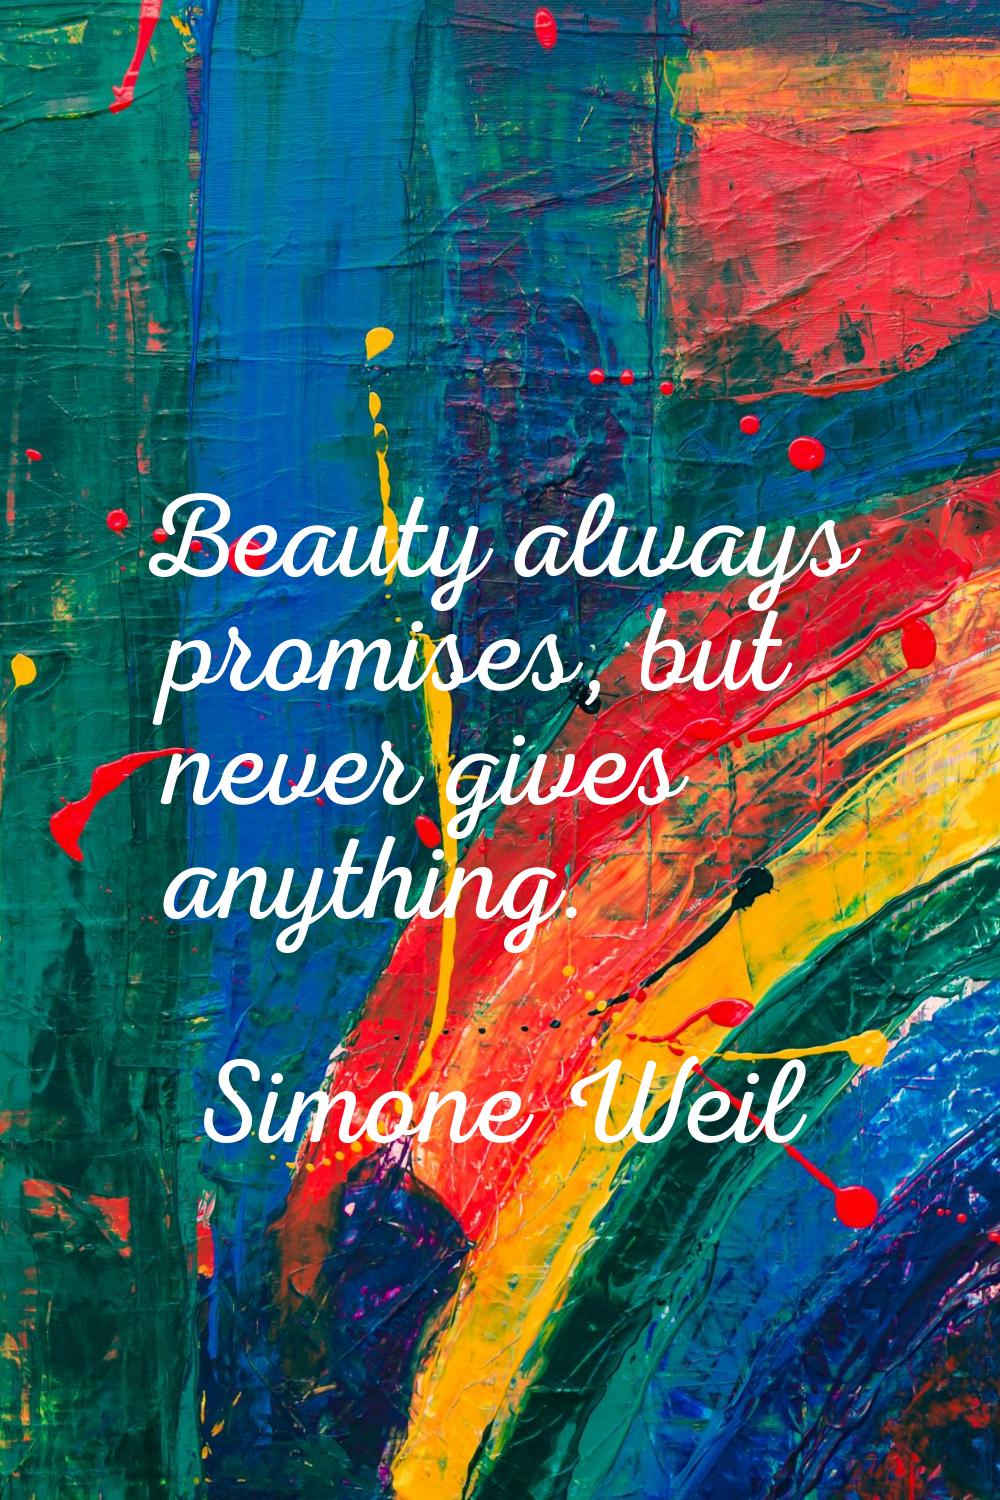 Beauty always promises, but never gives anything.